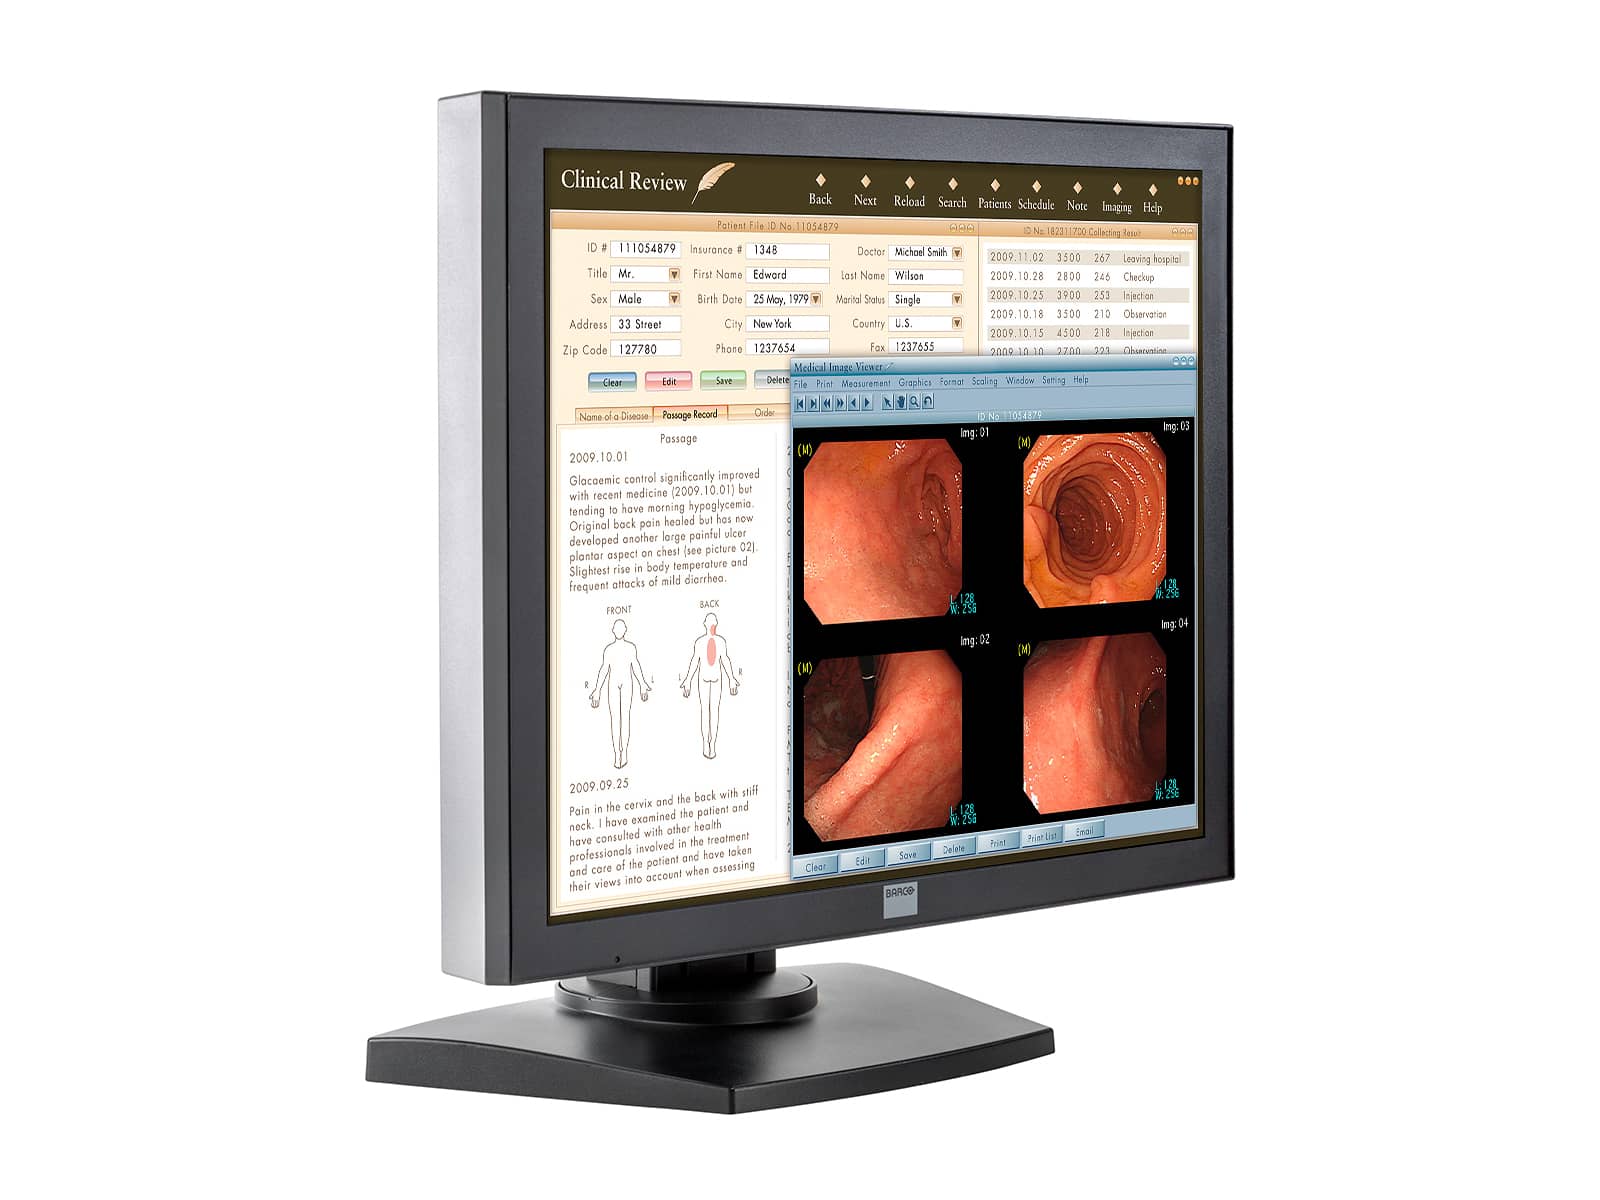 Barco MDRC-1119-TS 1MP 19" Touchscreen Color Clinical Review Display (K9301801A) Monitors.com 